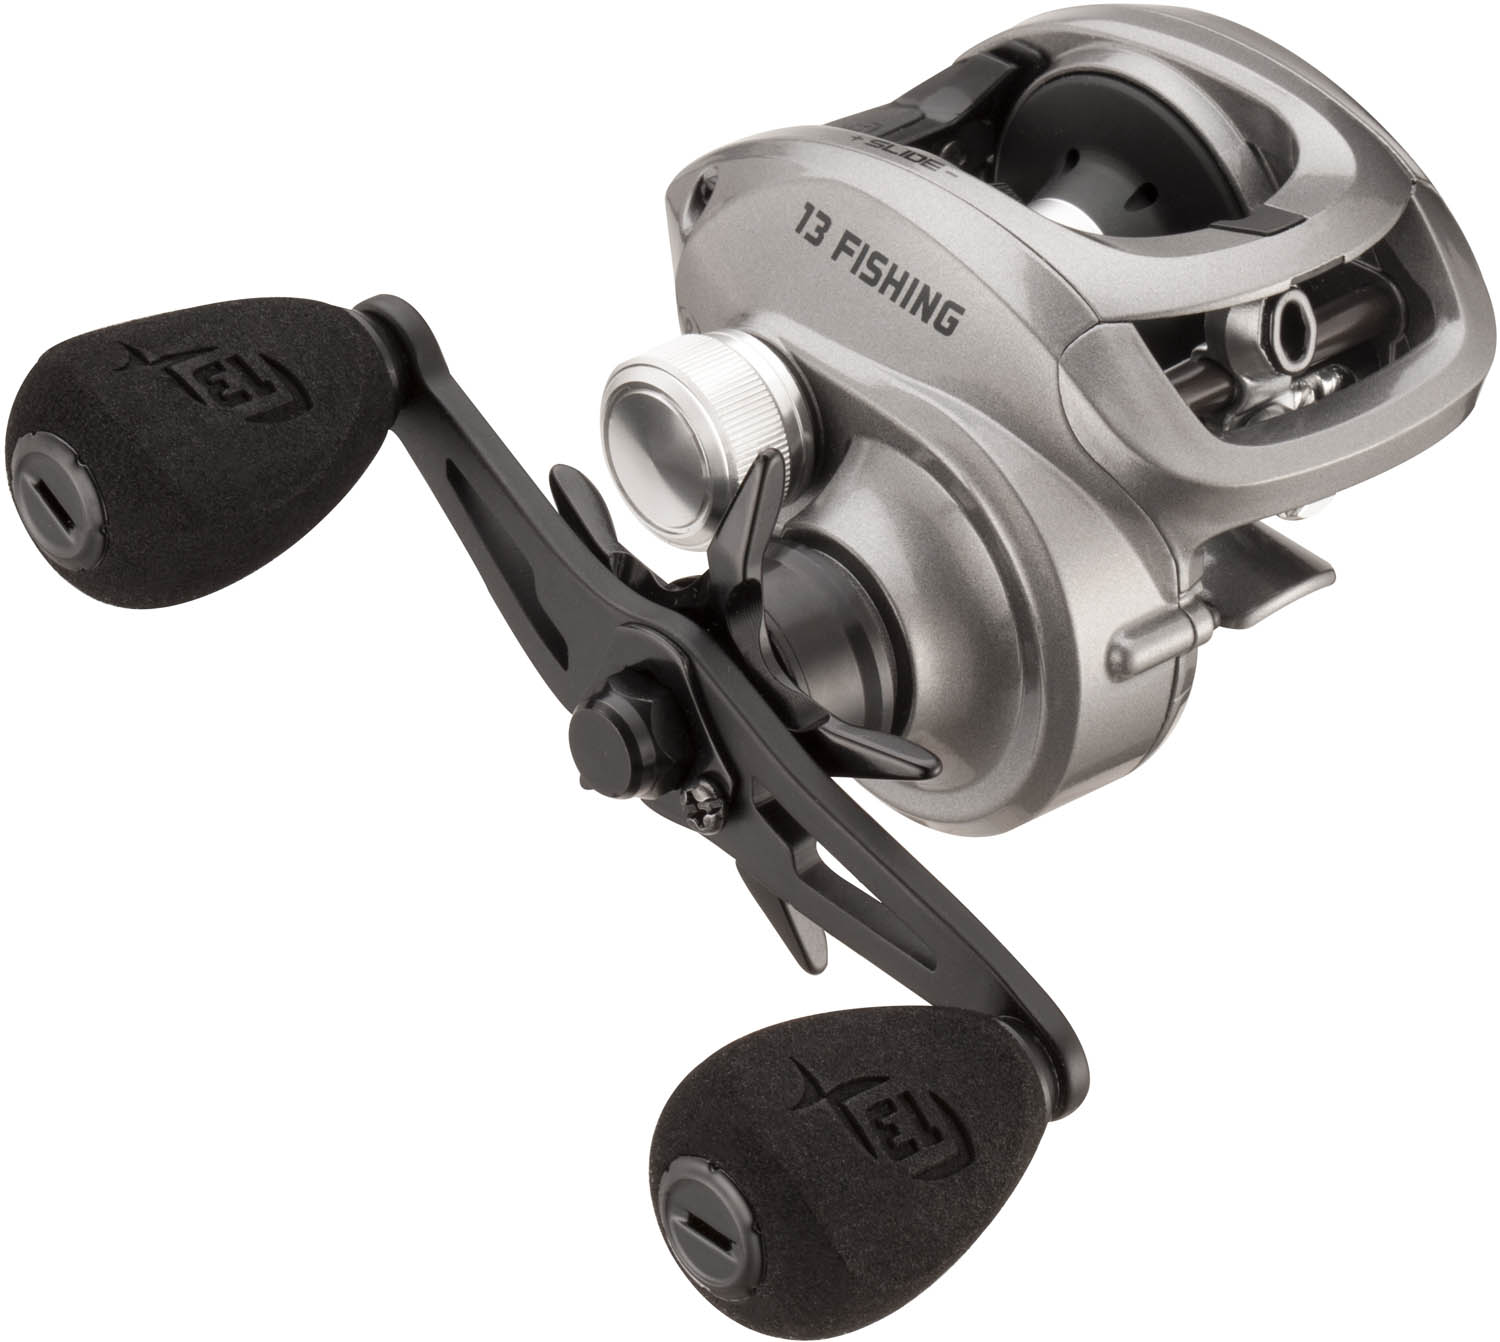 https://mcproductimages.s3-us-west-2.amazonaws.com/13%2Bfishing/13-fishing-inception-sld/INCEPTION%20SLD2%20casting%20reel_RH%20%283%29.jpg